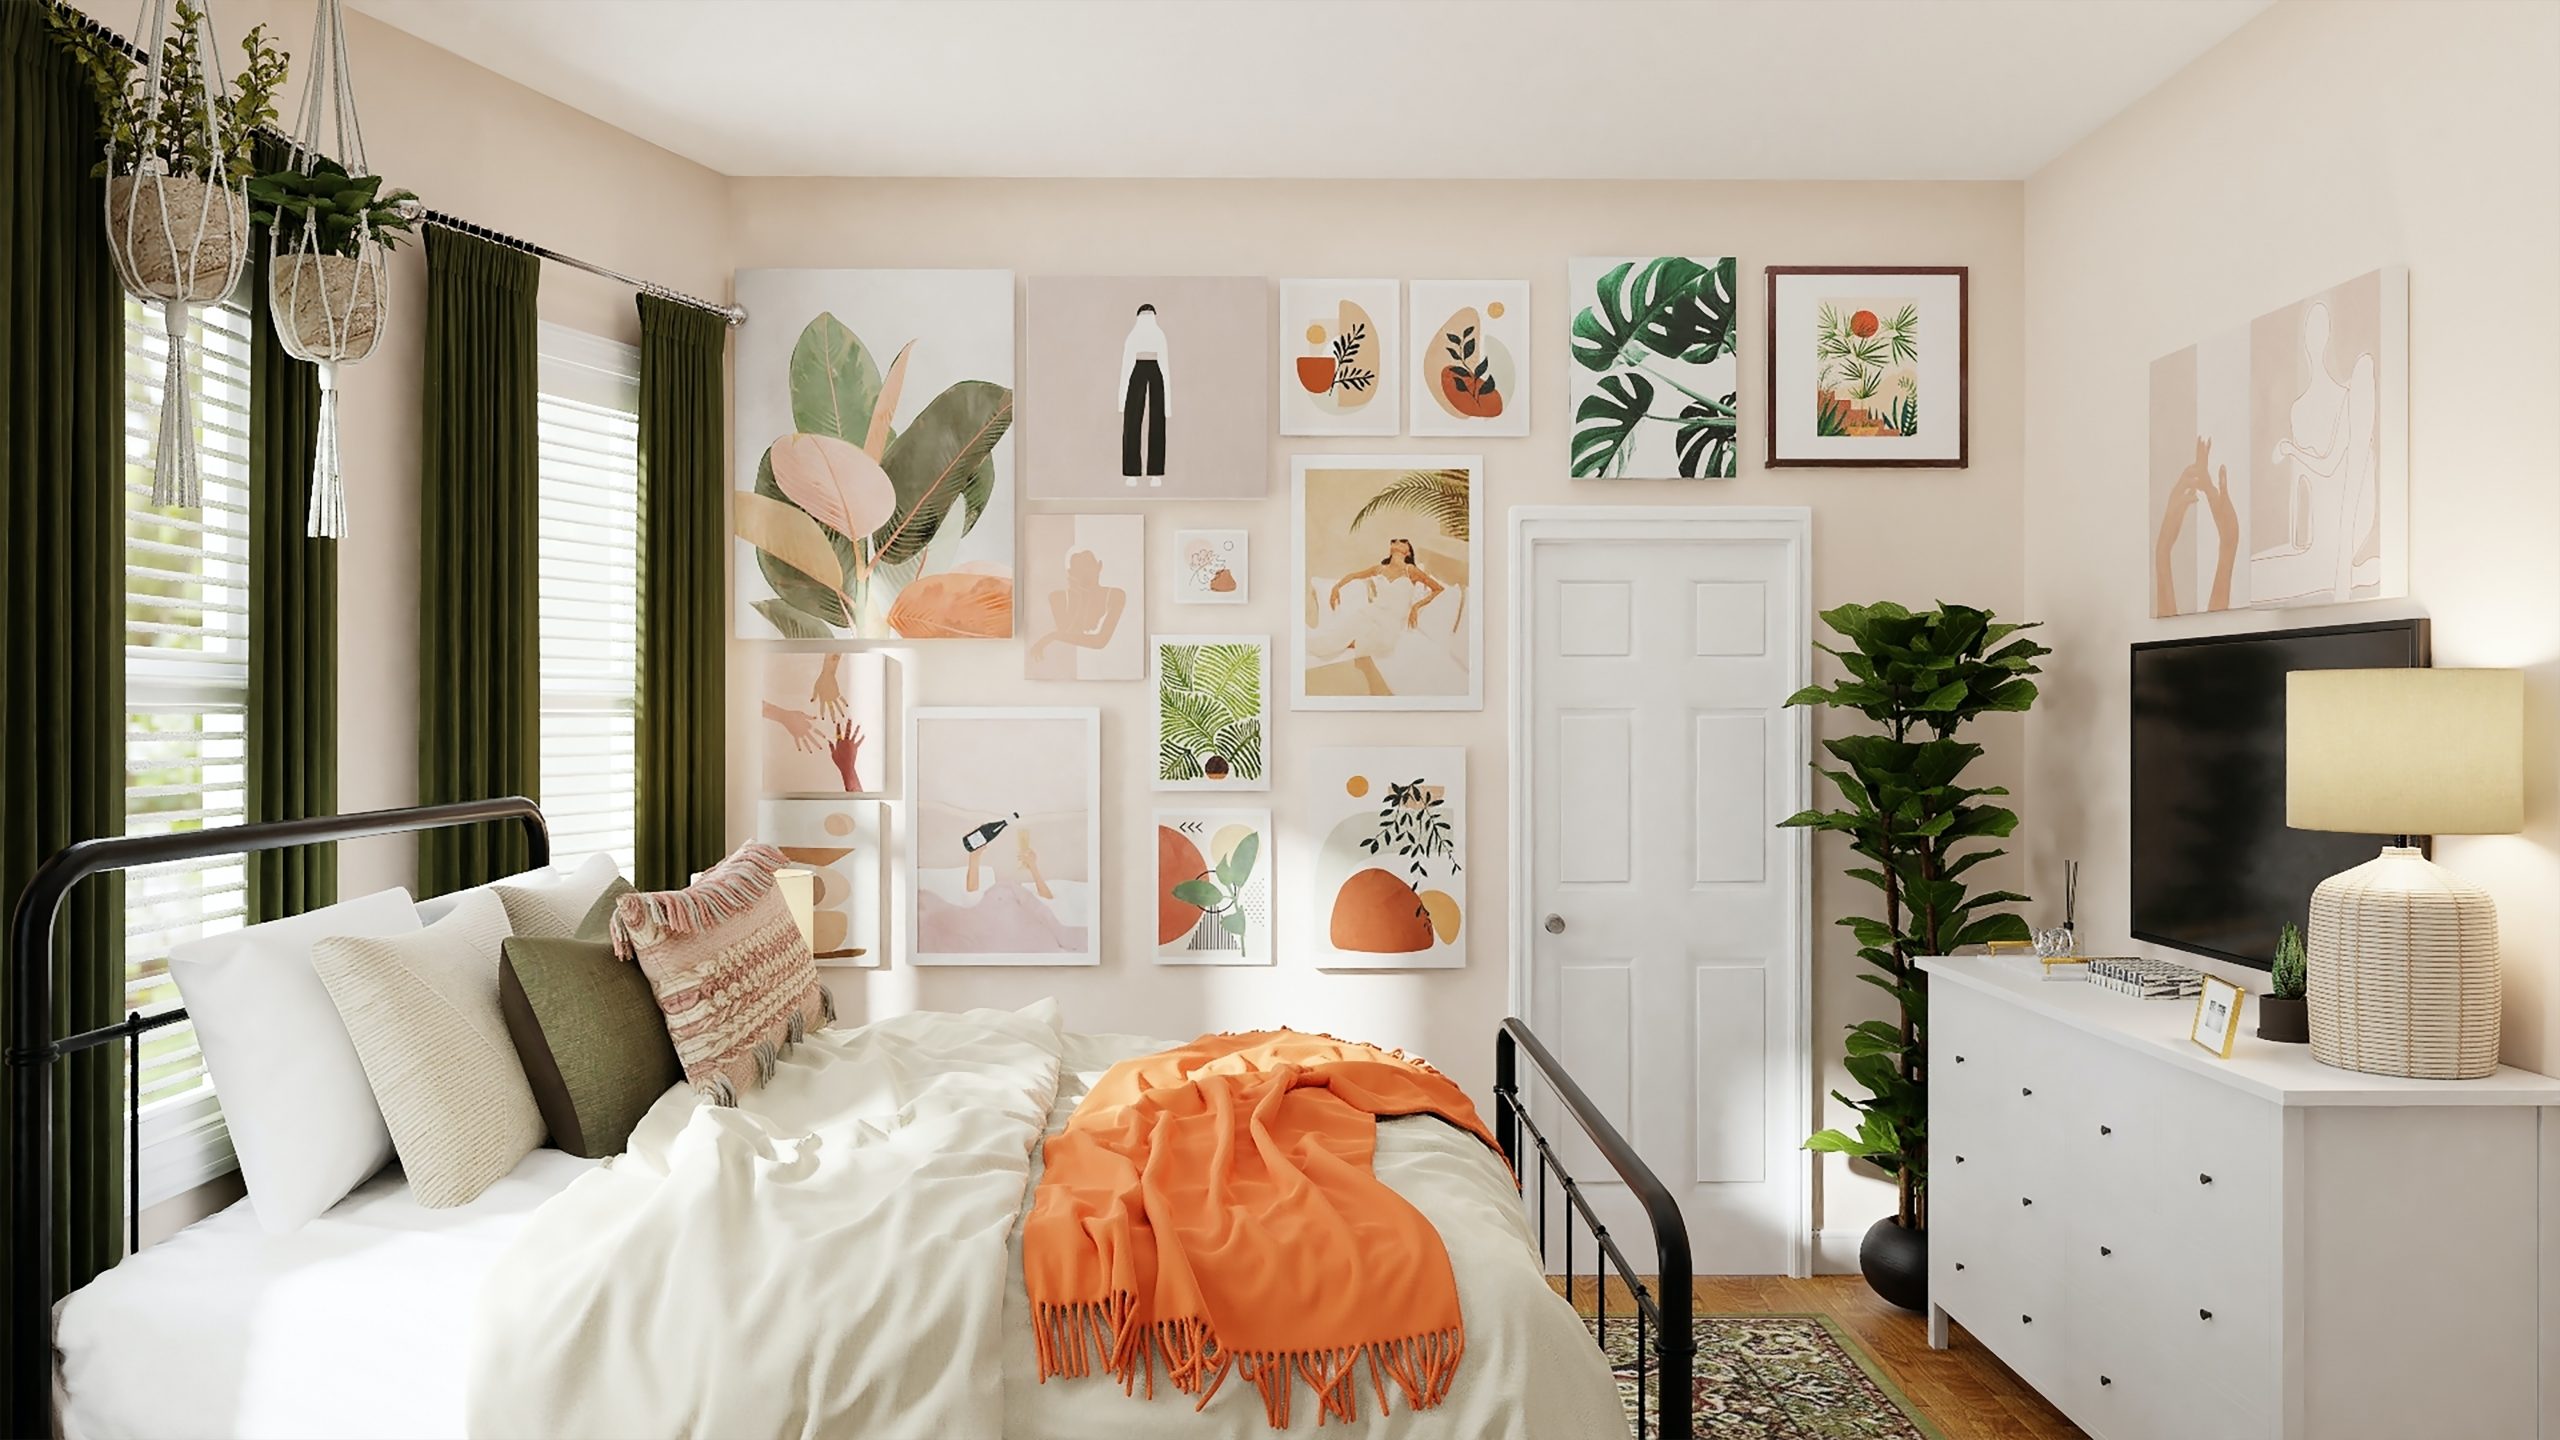 A light and airy bedroom with many framed pictures of plants on the walls.